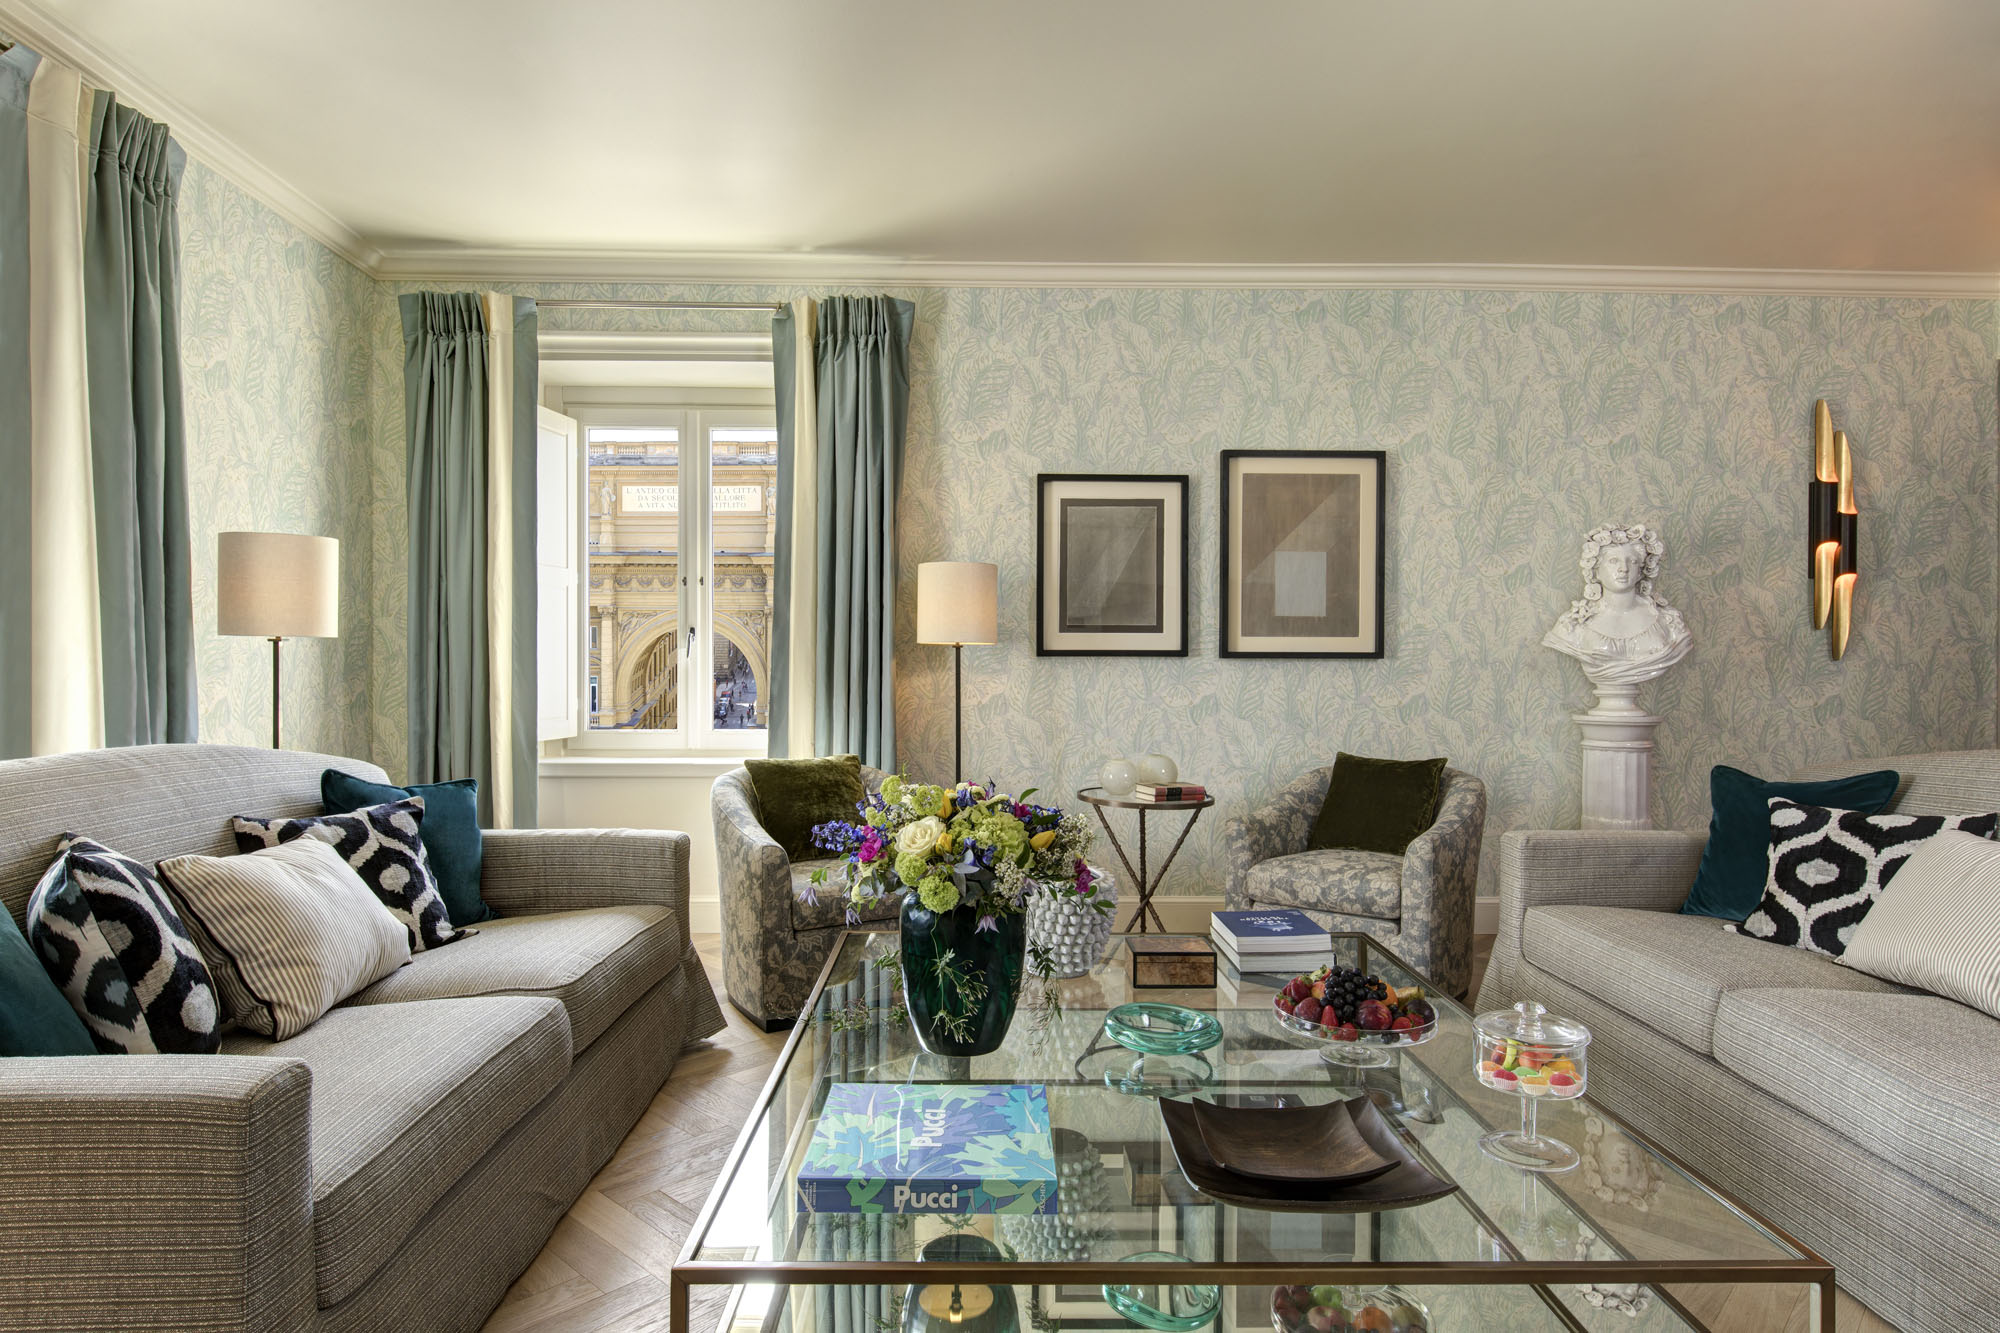 Hotel Savoy: 5-Star Luxury Hotel in Florence near the Duomo